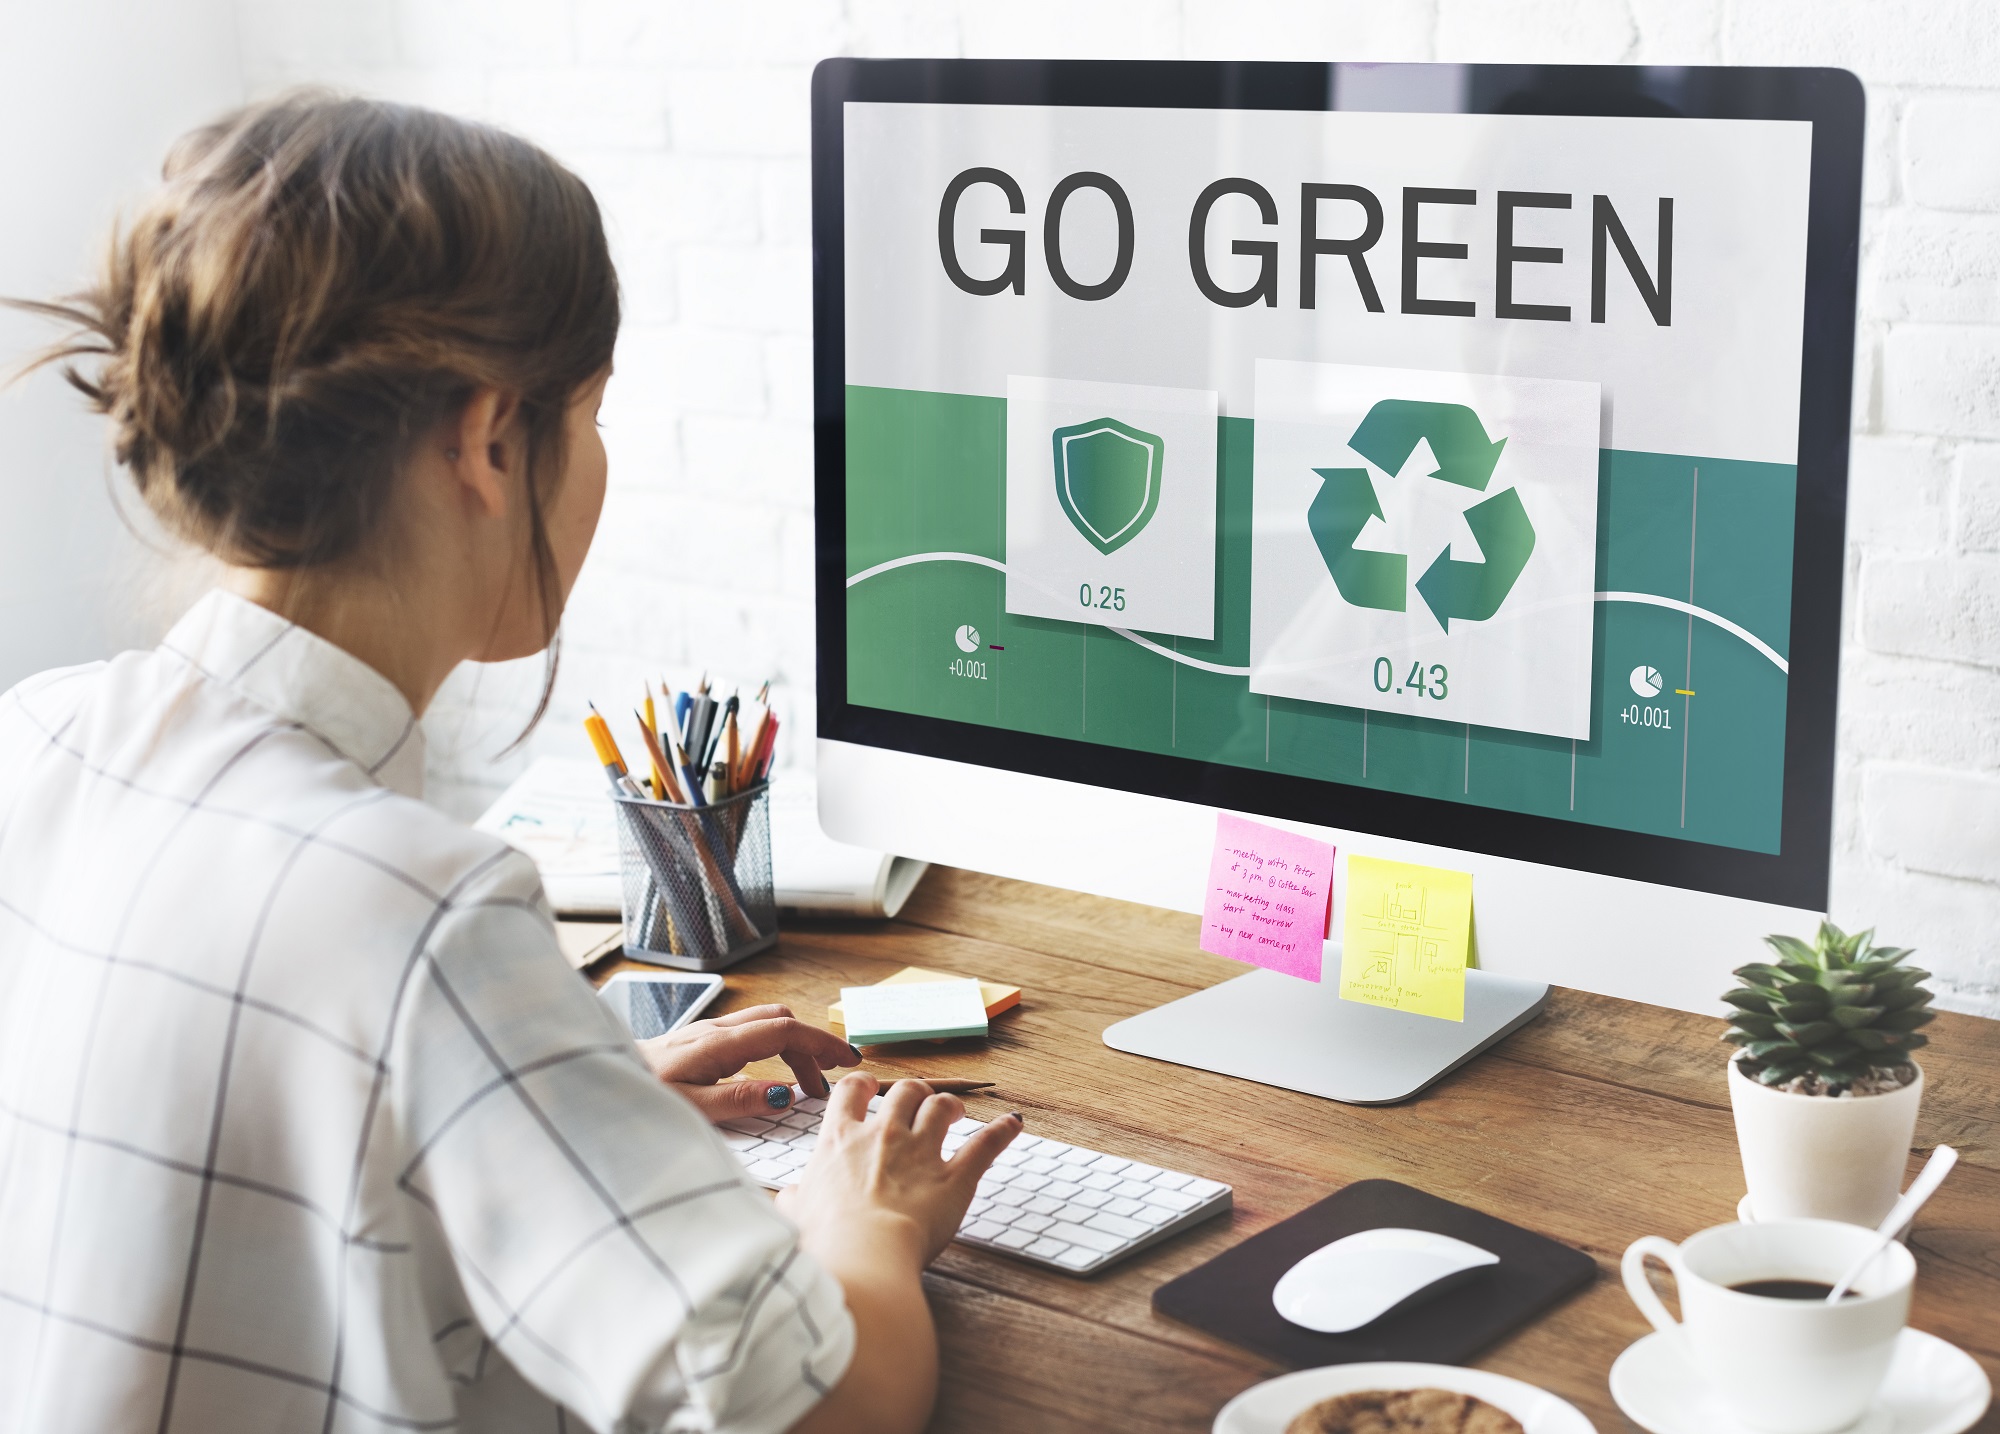 6 tips on how to reduce your business carbon footprint